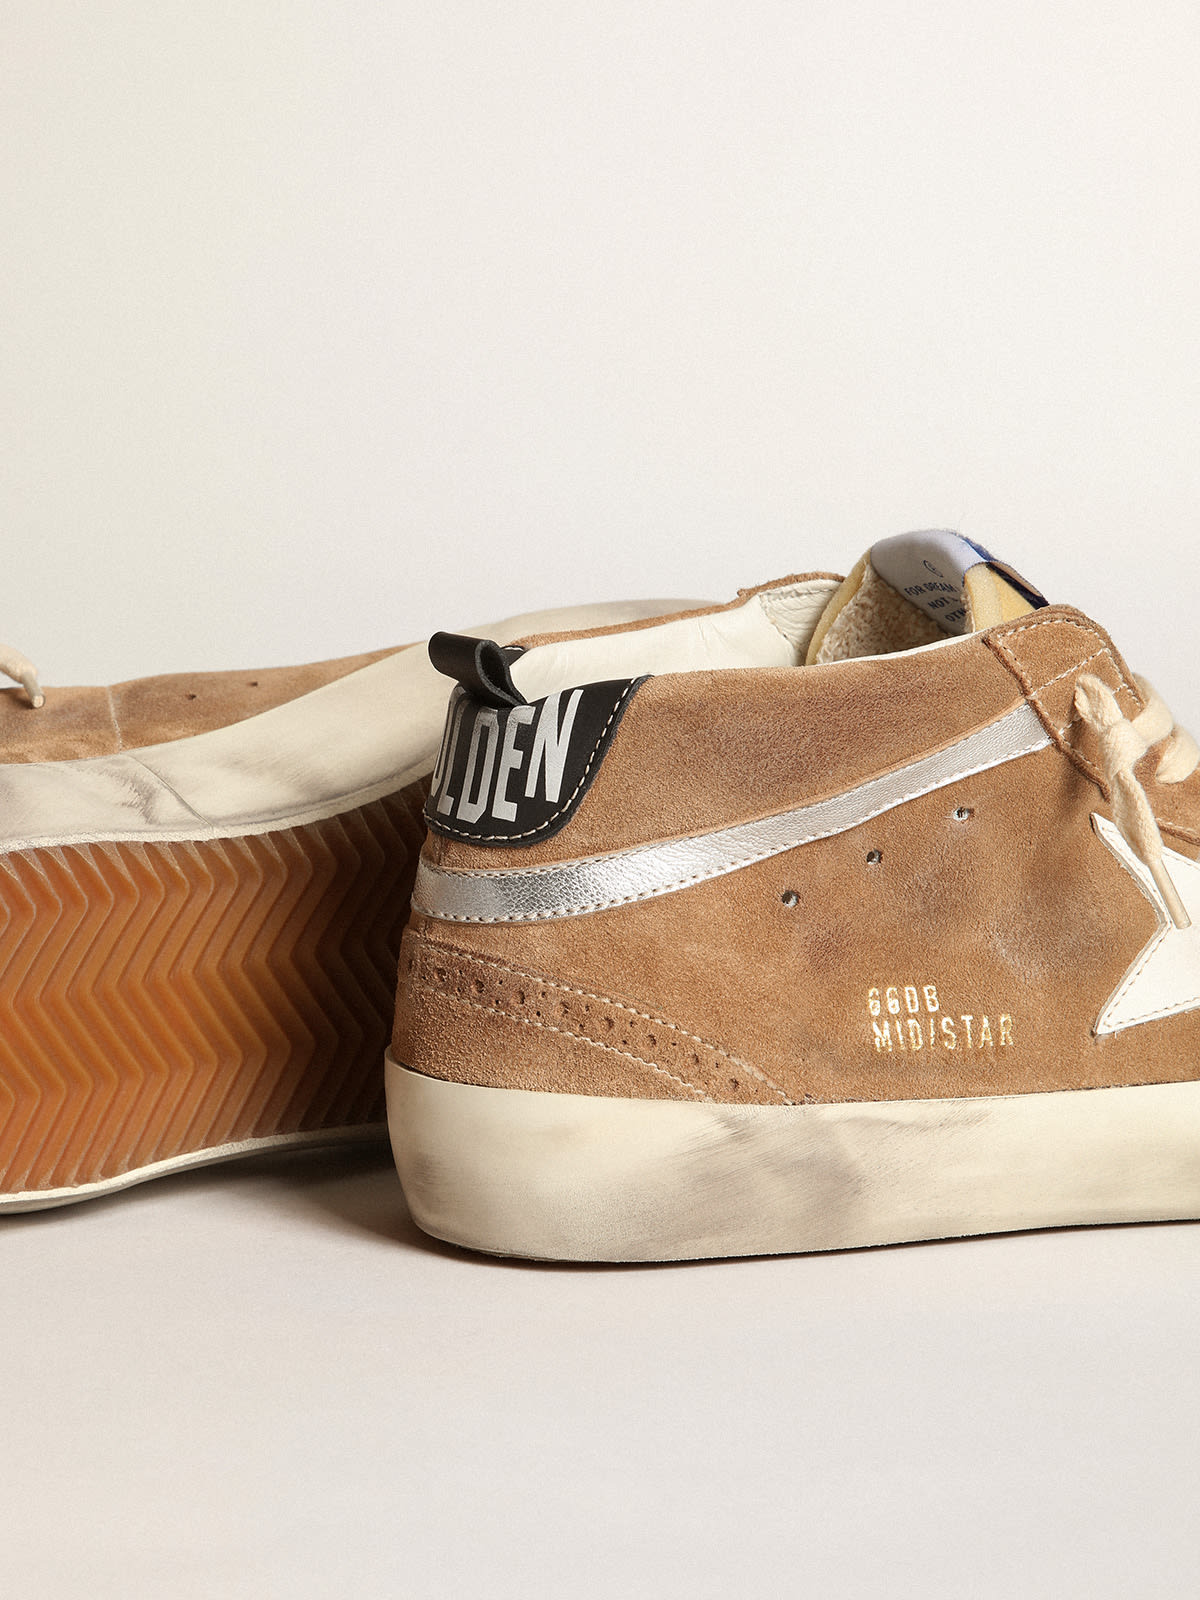 Golden Goose - Mid Star sneakers in tobacco-colored suede with white leather star and silver metallic leather flash in 